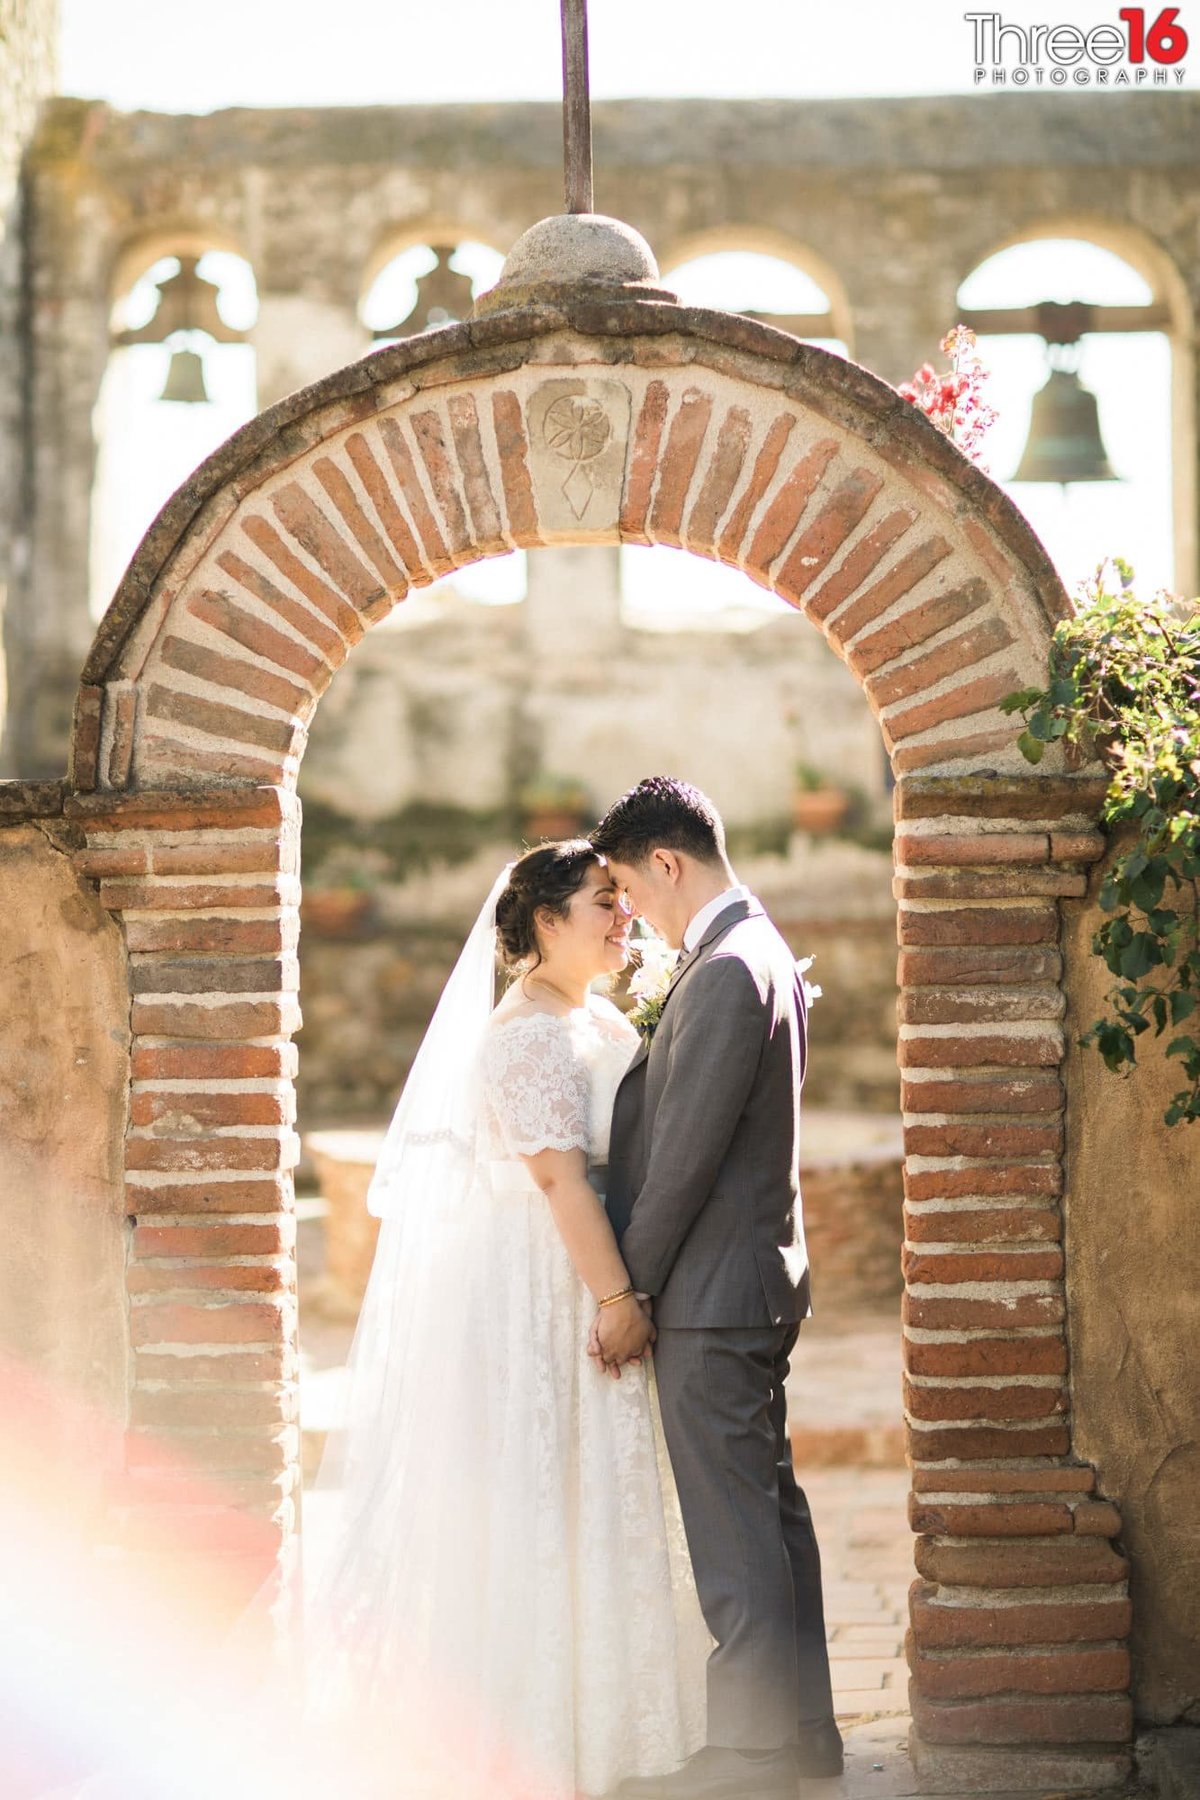 Tender moment for the Bride and Groom under the brick archway